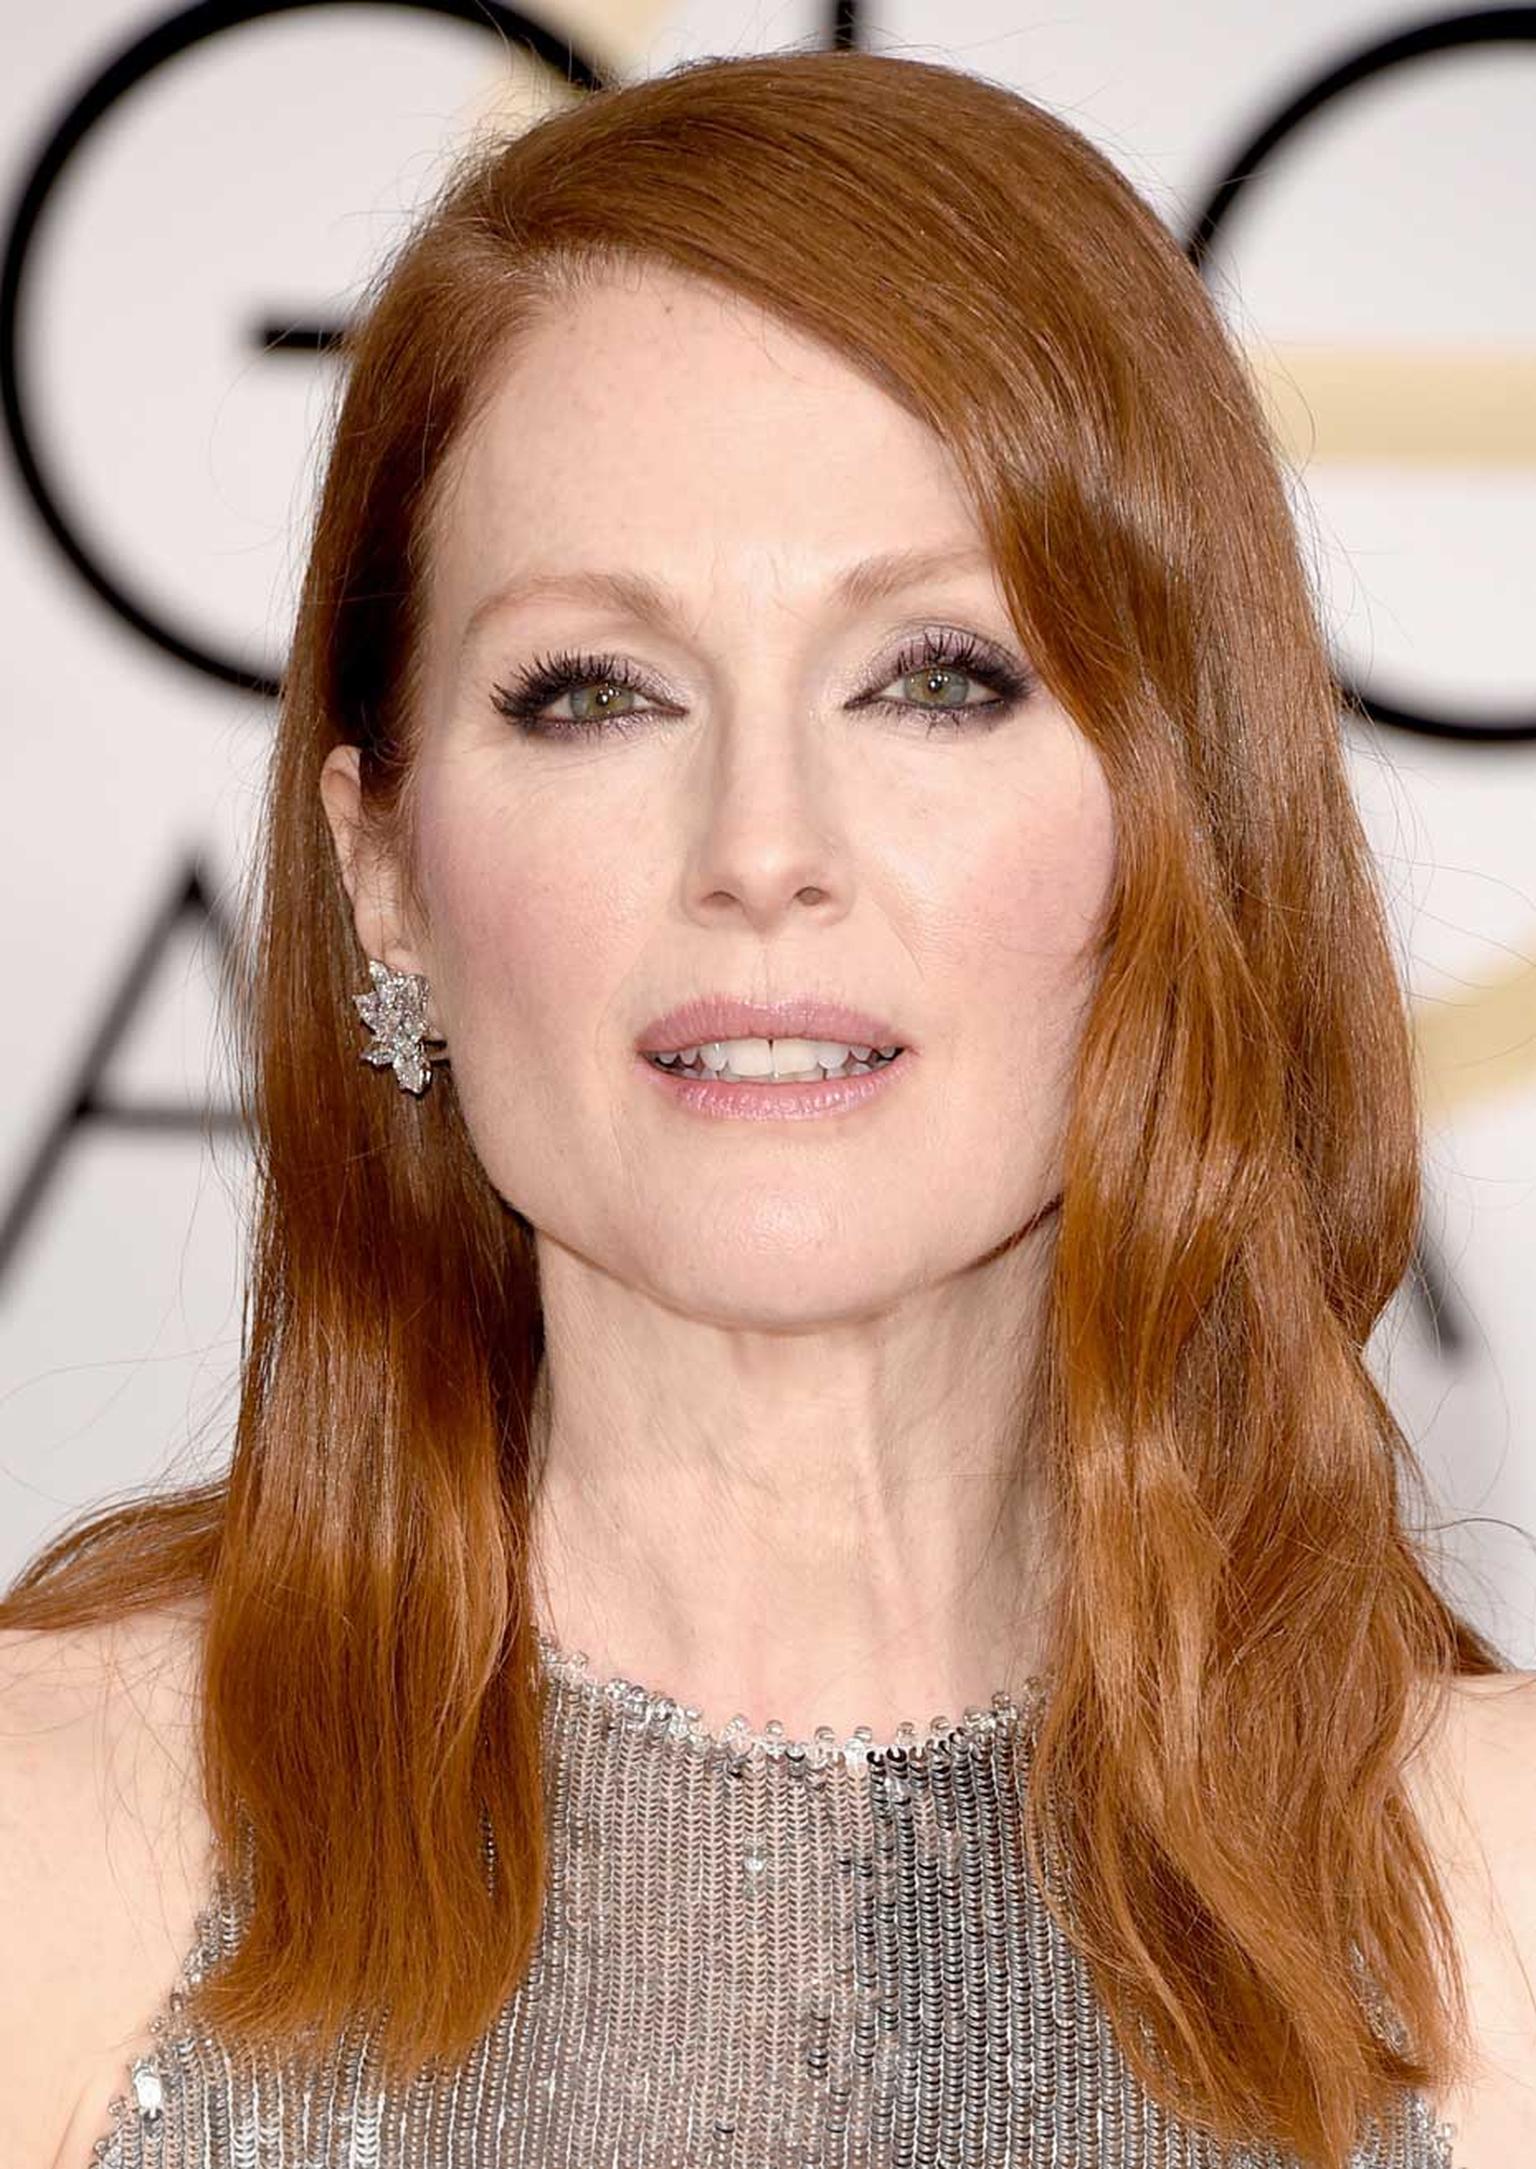 Julianne Moore wore Chopard diamonds from the High Jewelry Collection at the 2015 Golden Globes.